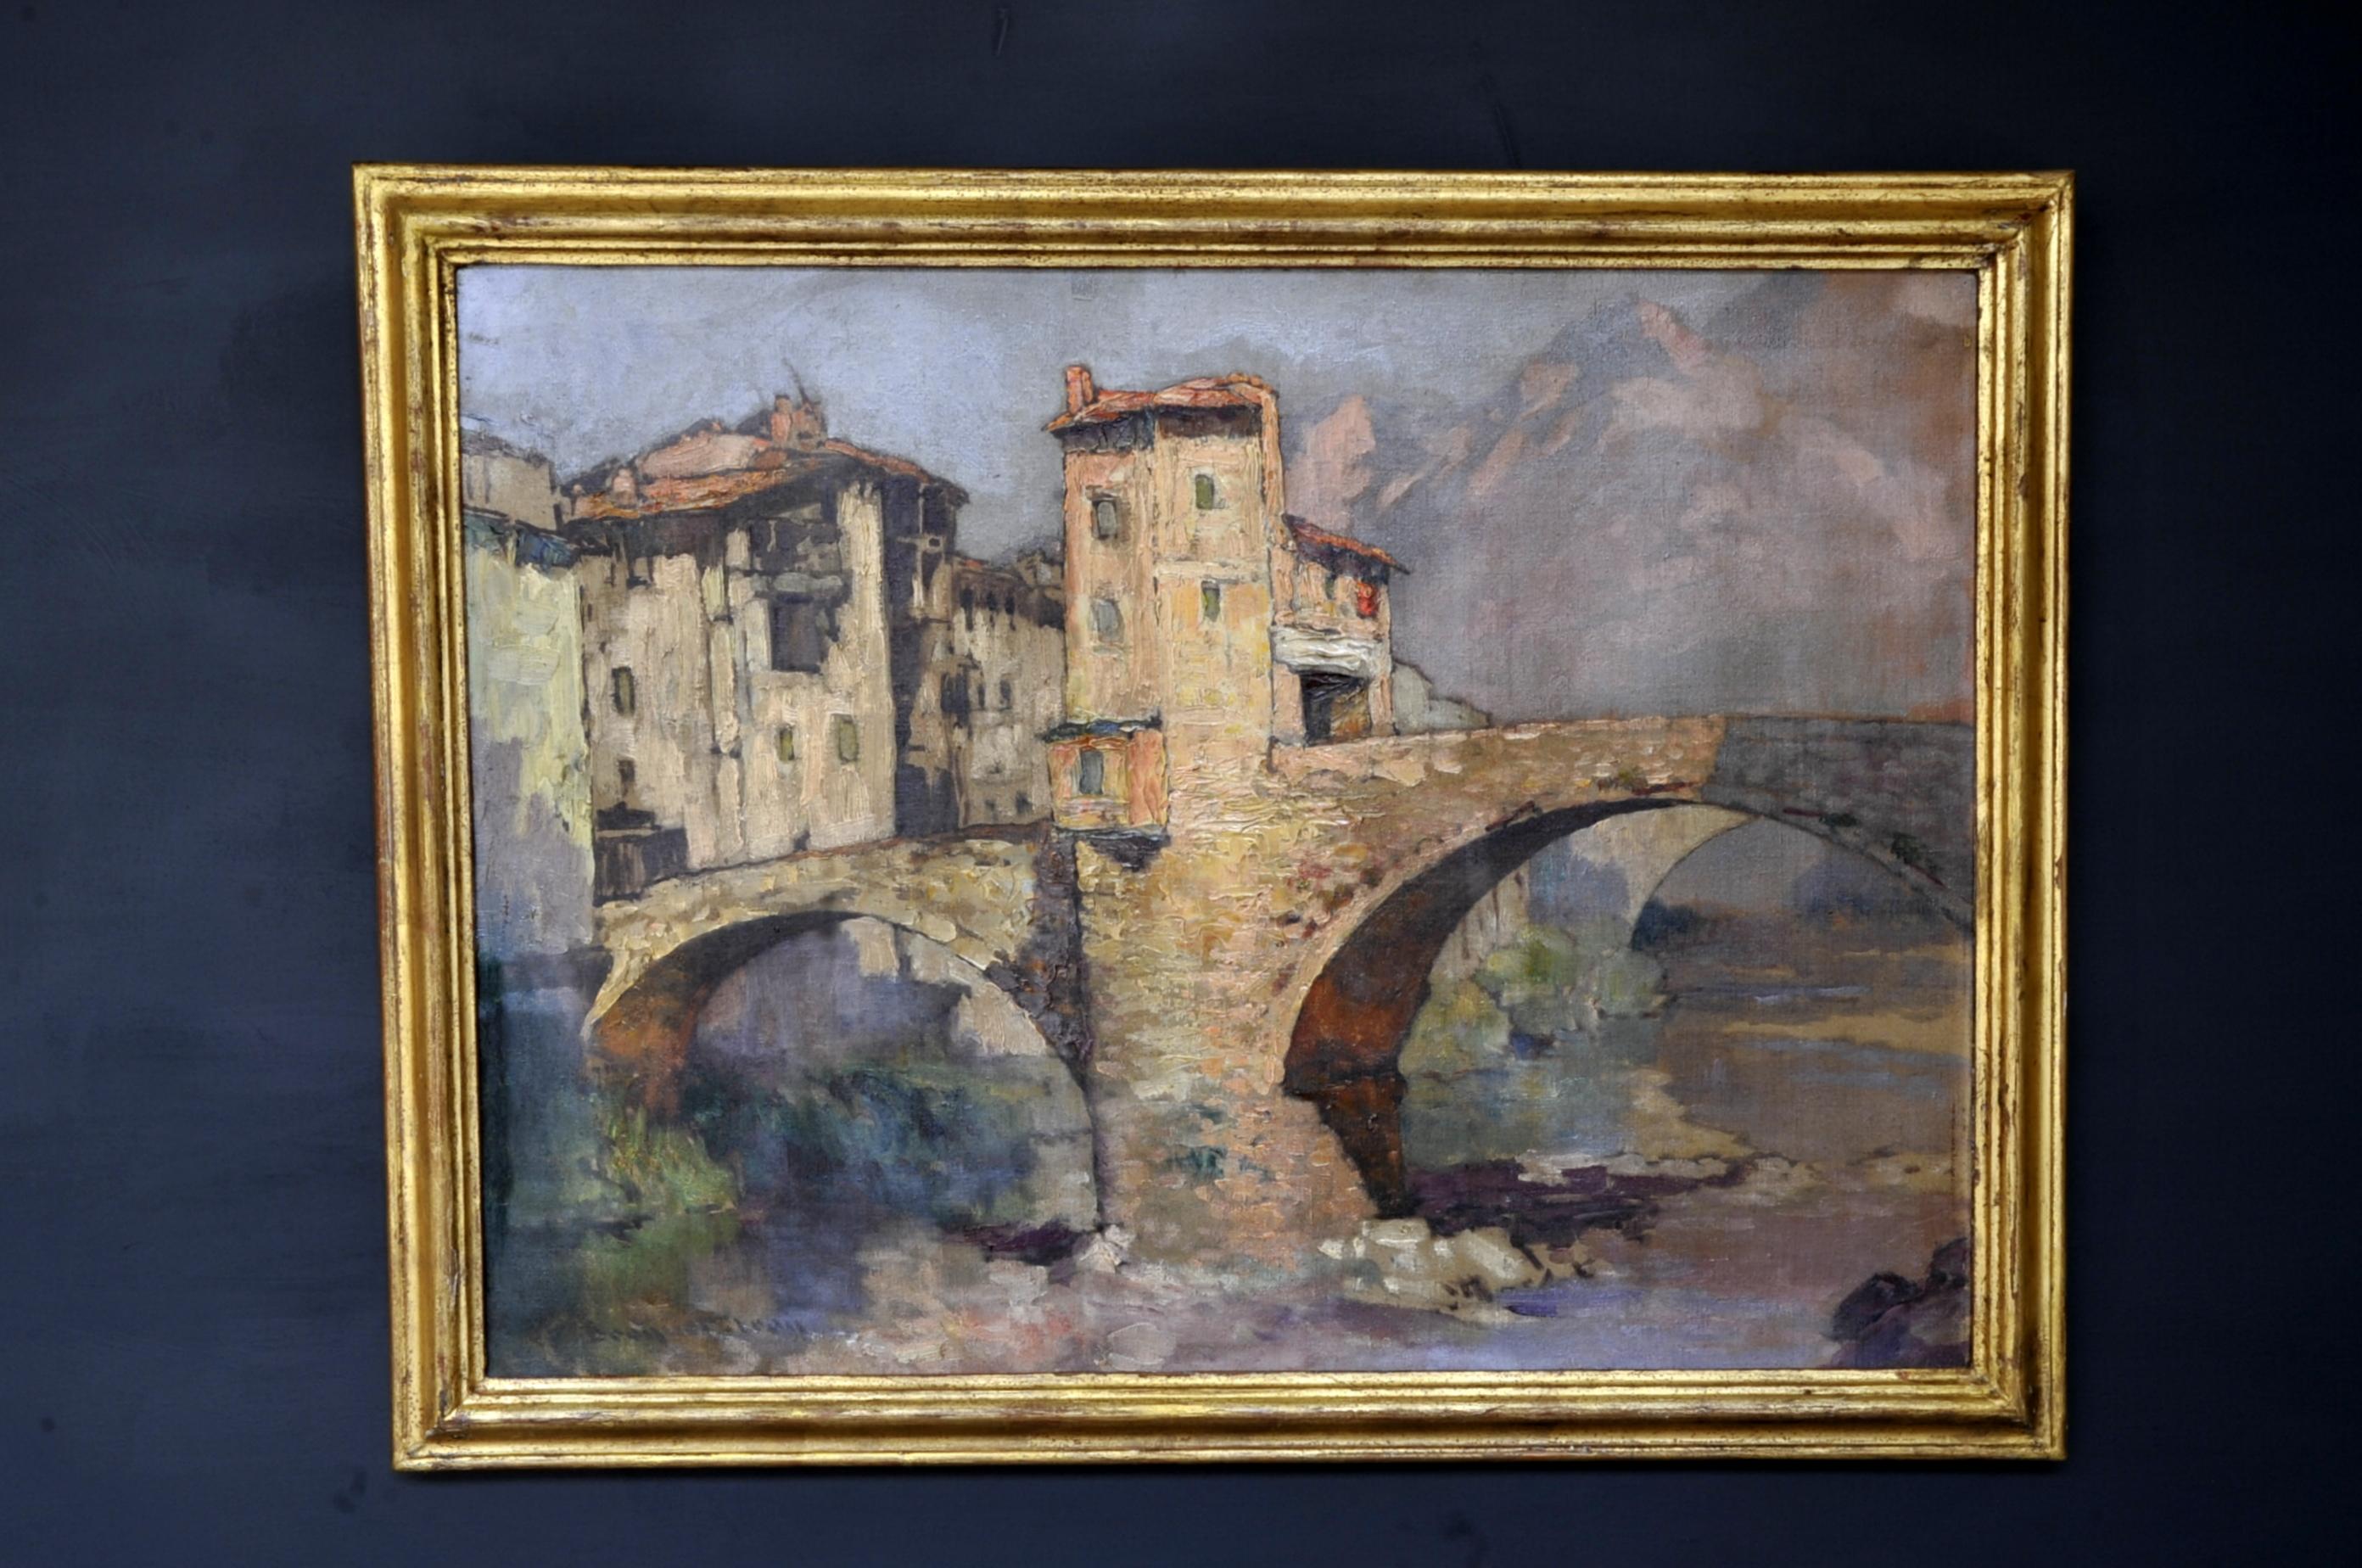 Léon Broquet (1869-1935) 

Oil on canvas representing the old bridge at Sospel in the Alpes Maritimes (FRANCE).

We can make out the alps mountains in the background. Beautiful colors. The architectural parts such as the fortified bridge and the